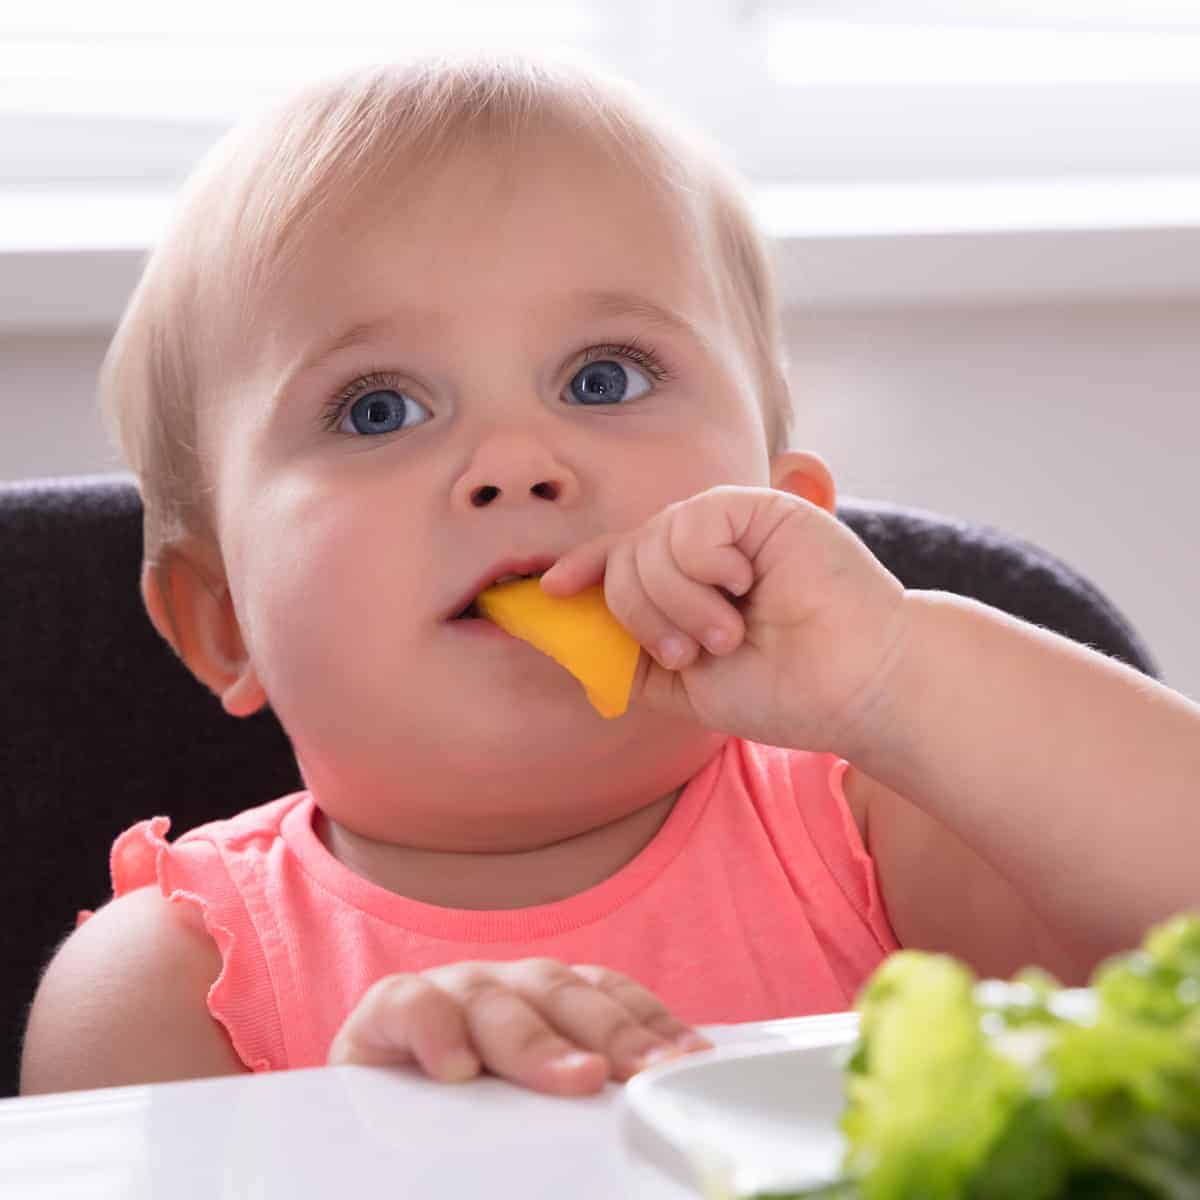 When can Babies Eat Puffs, Cheerios, & Other Foods Safely?